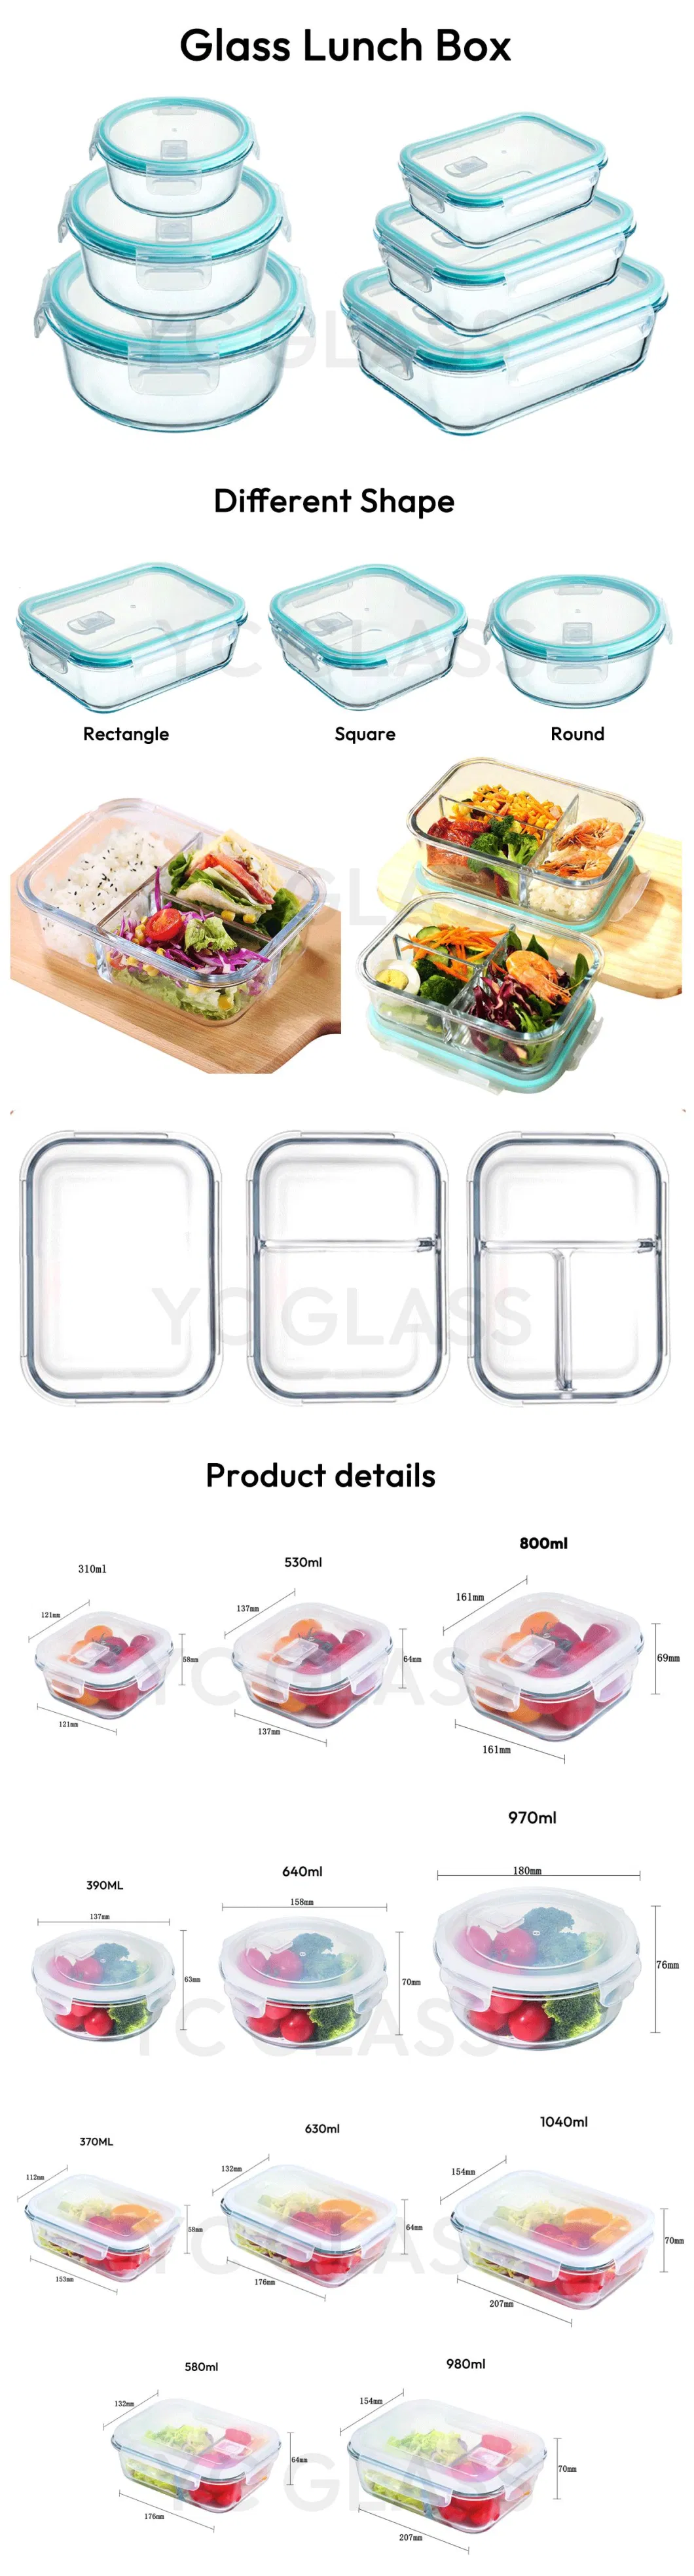 370ml 640ml 800ml 1040ml 1200ml Round Square Rectangle Personal Lunch Box Glass Microwave Safe with PP Lid